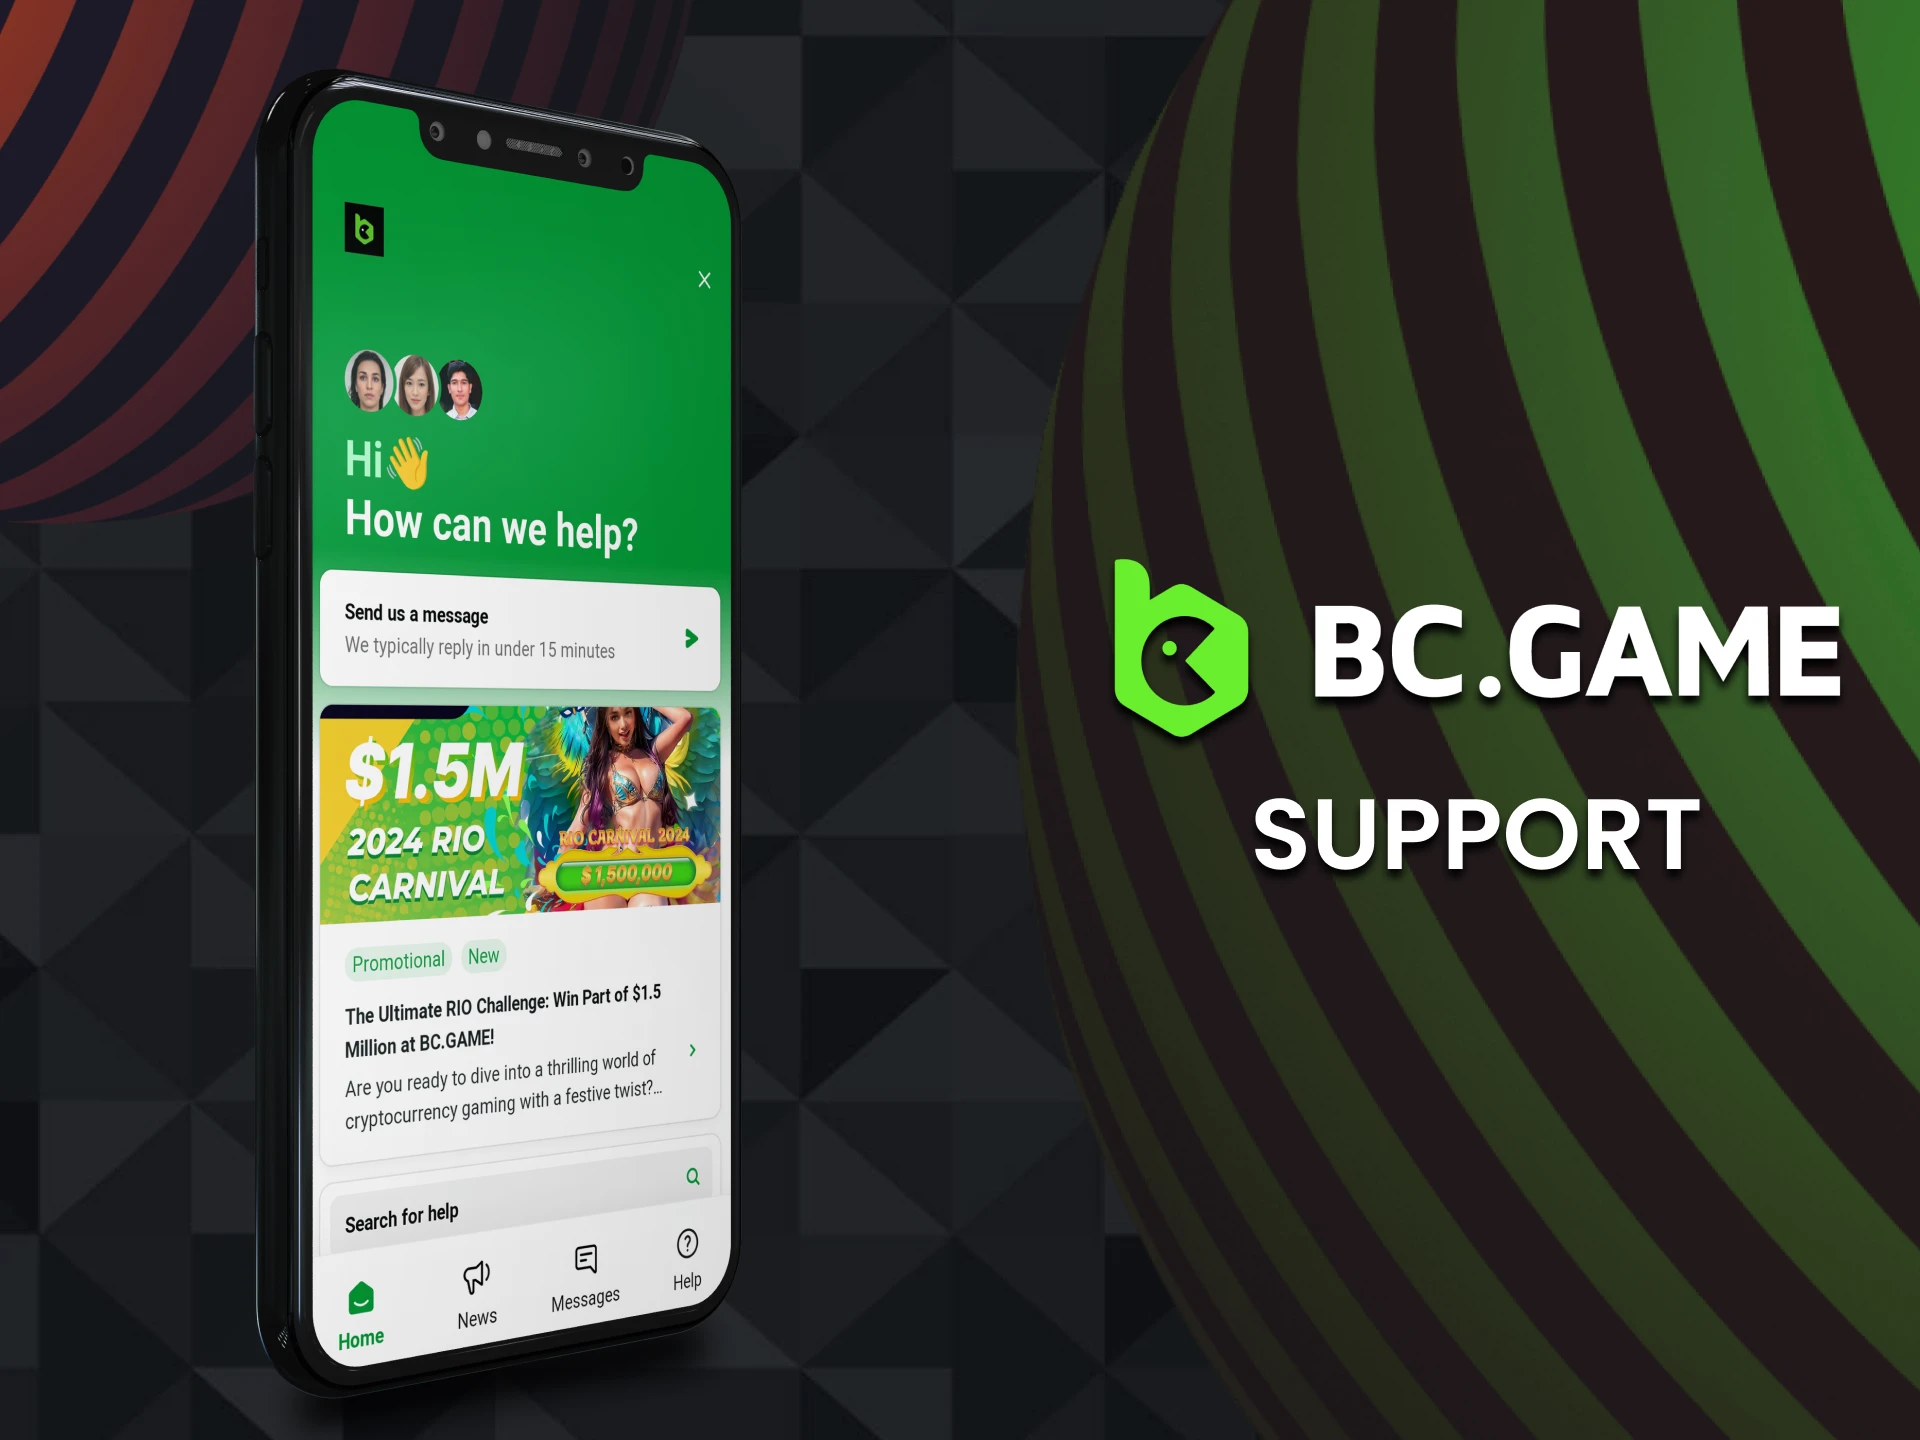 You can contact the support team in the BC Game application.